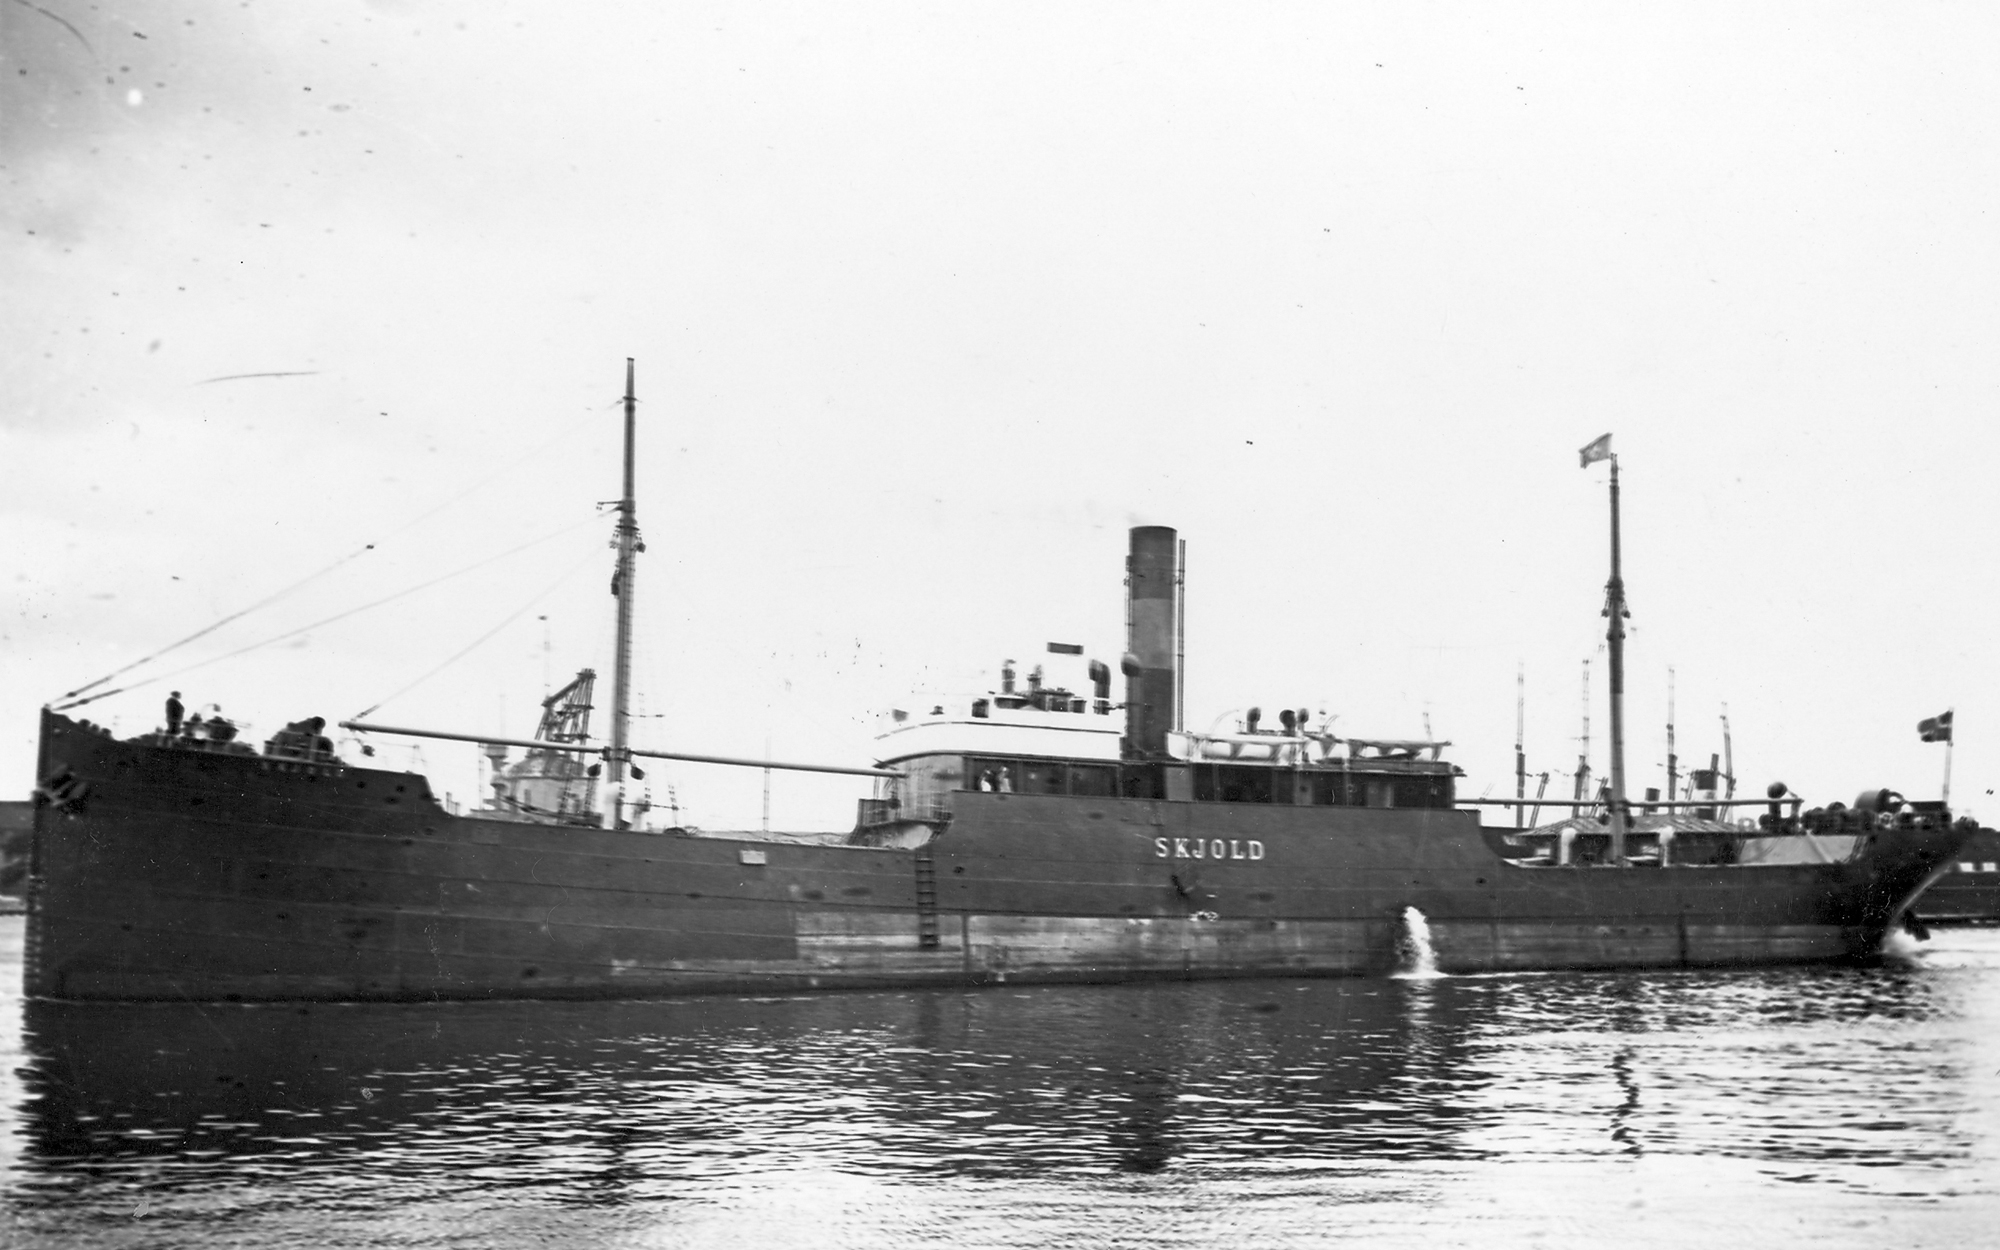 Egebjerg was signed on the SS <em>Skjold</em> when the war broke out. The ship was requisitioned by the Ministry of War Transport during the Second World War in May 1940. (Marine Museum of Denmark)